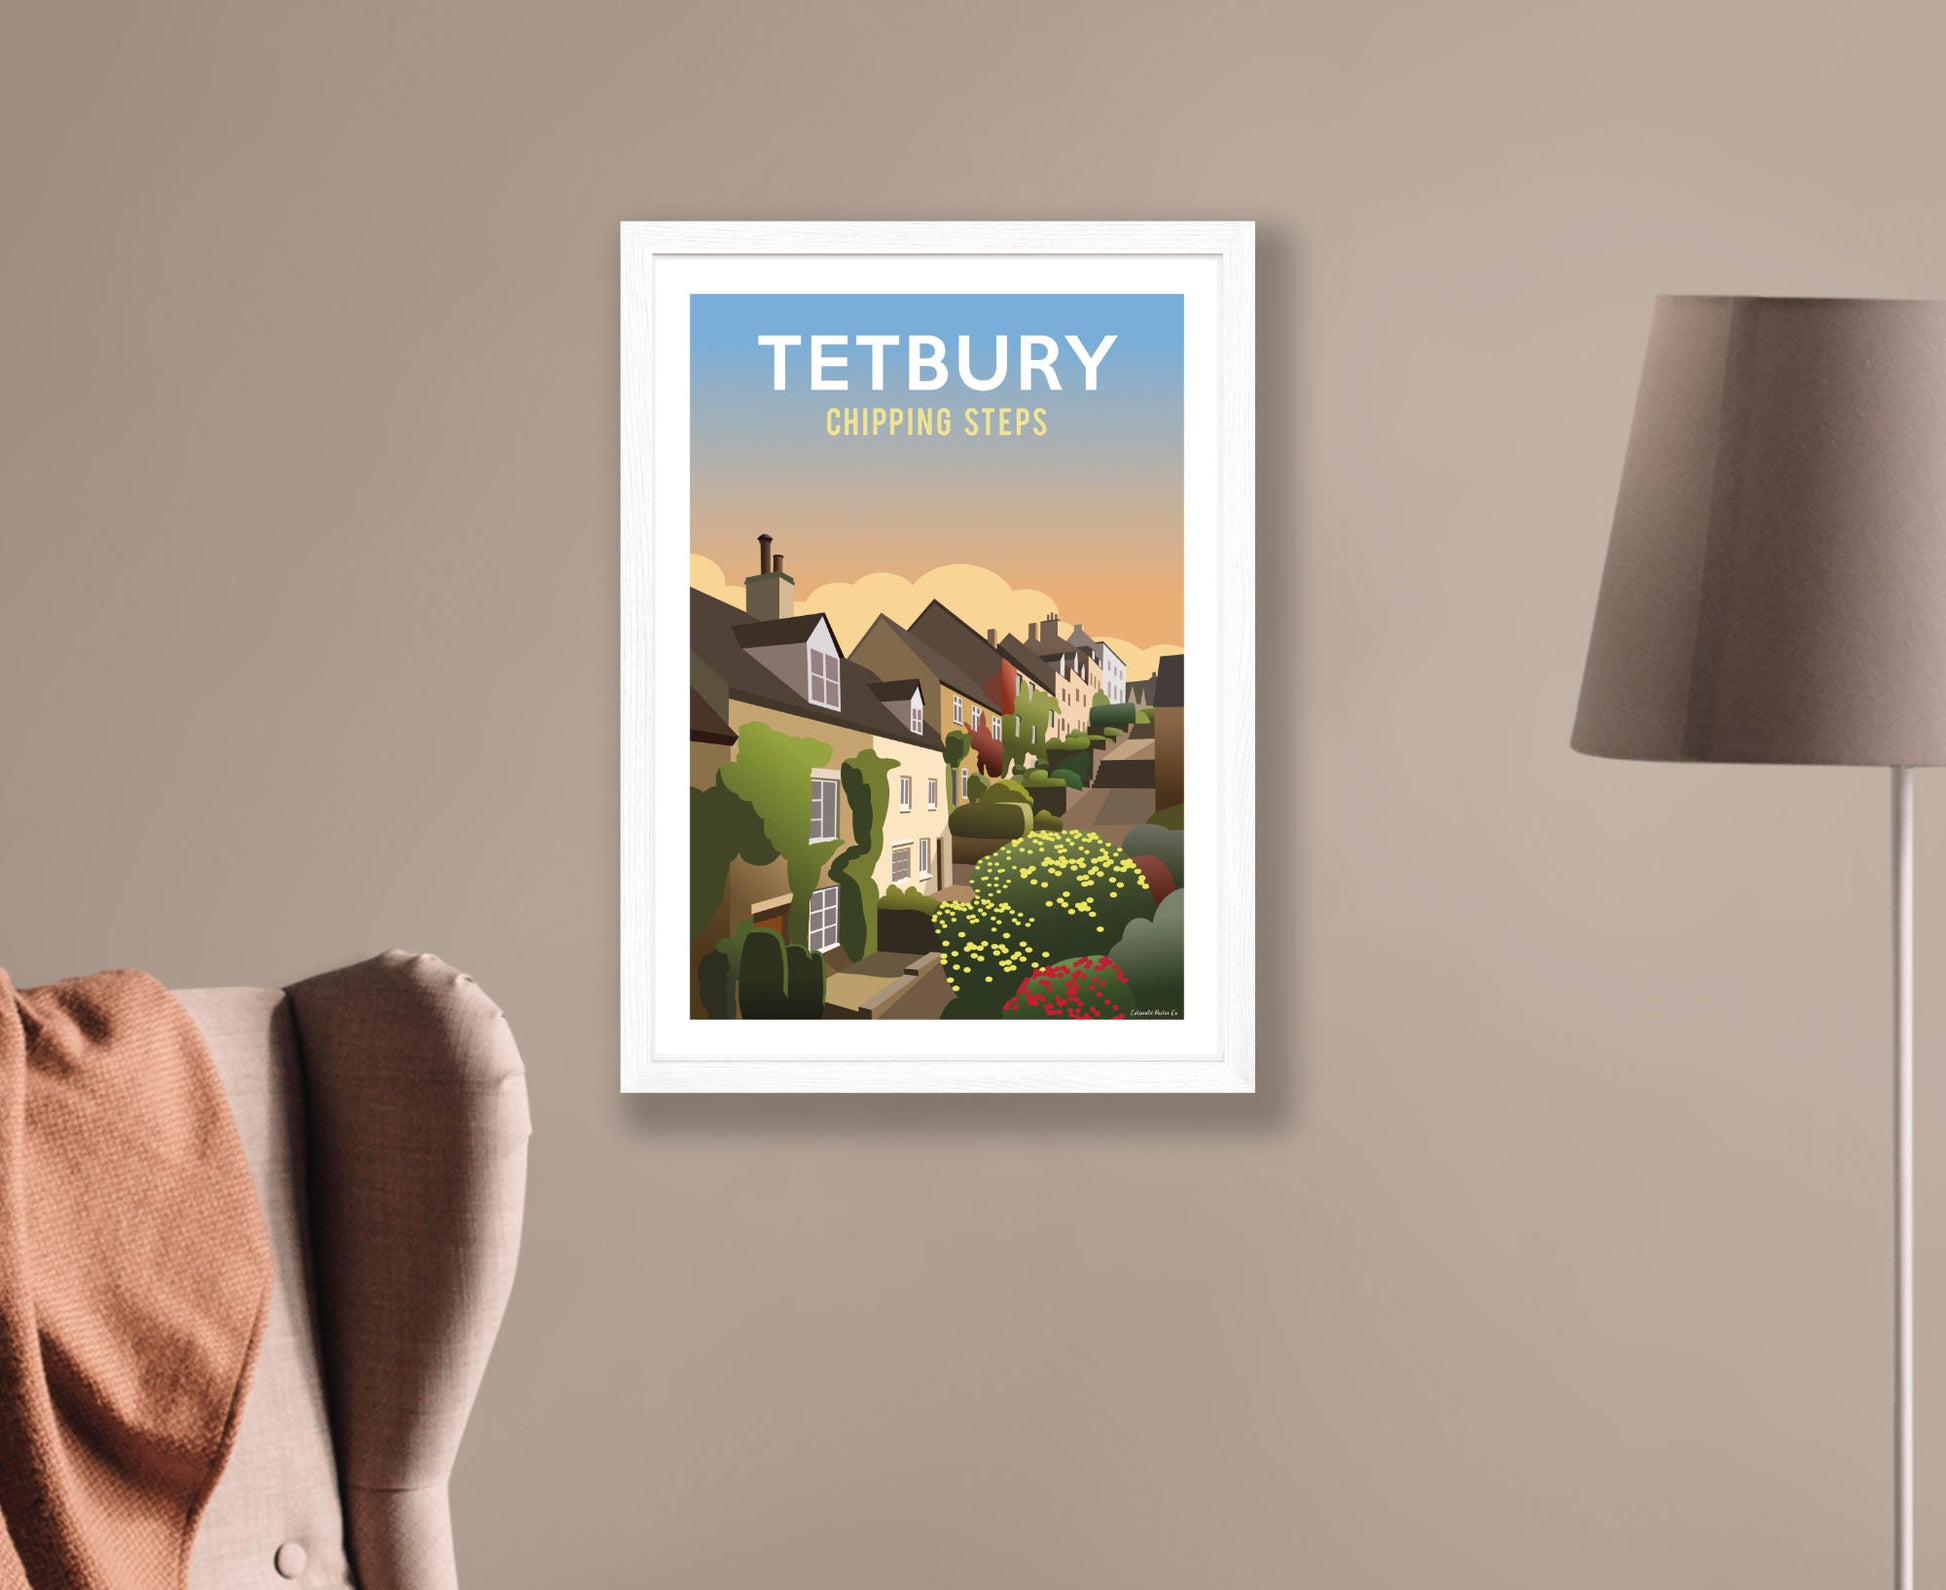 Tetbury Chipping Steps Poster in white frame